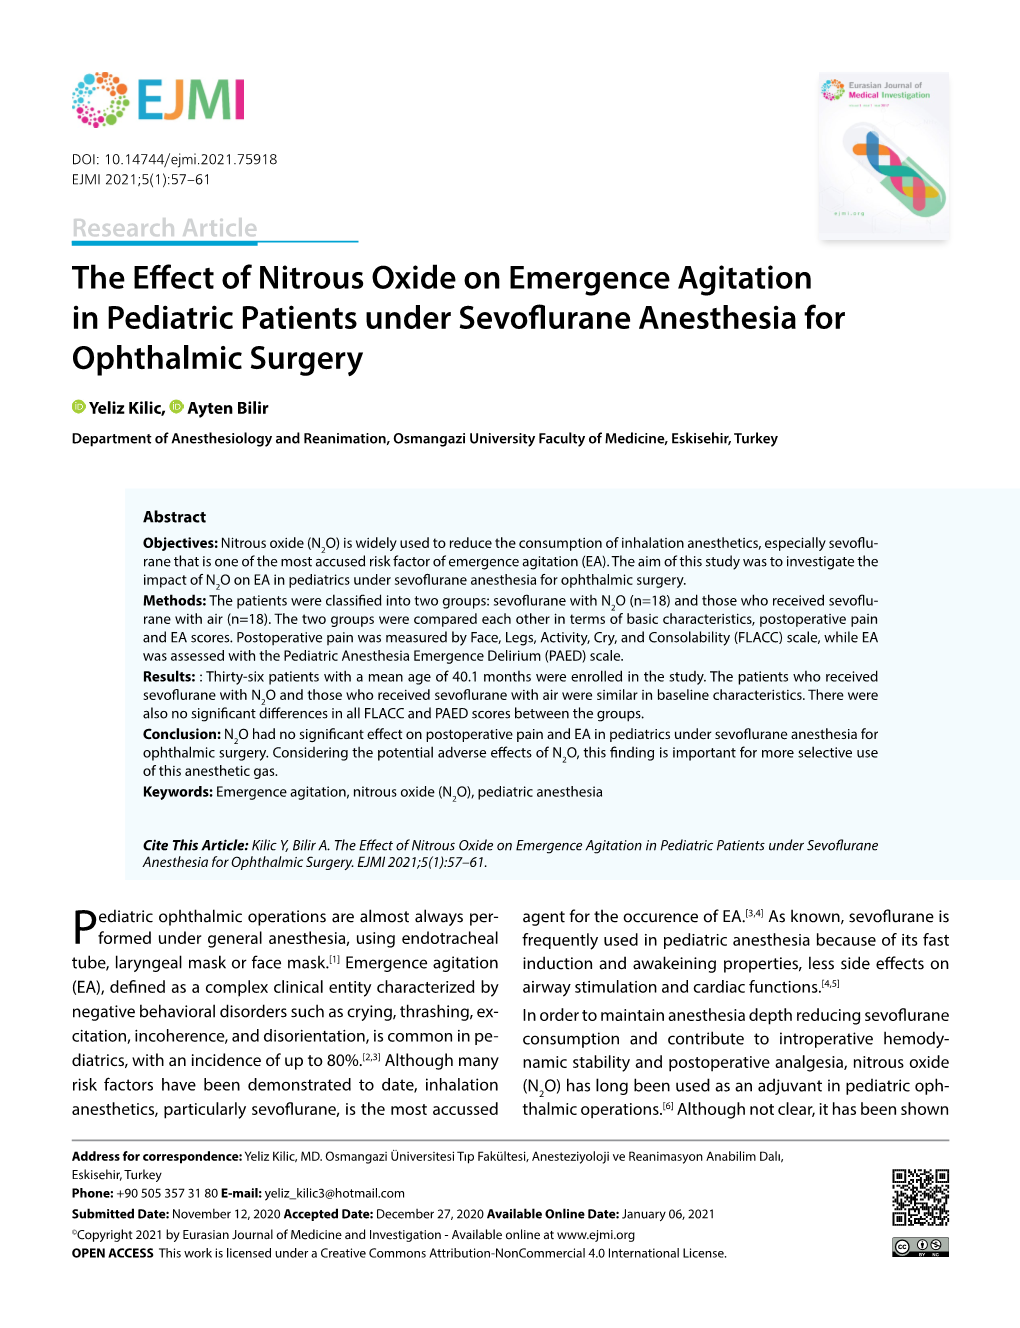 The Effect of Nitrous Oxide on Emergence Agitation in Pediatric Patients Under Sevoflurane Anesthesia for Ophthalmic Surgery